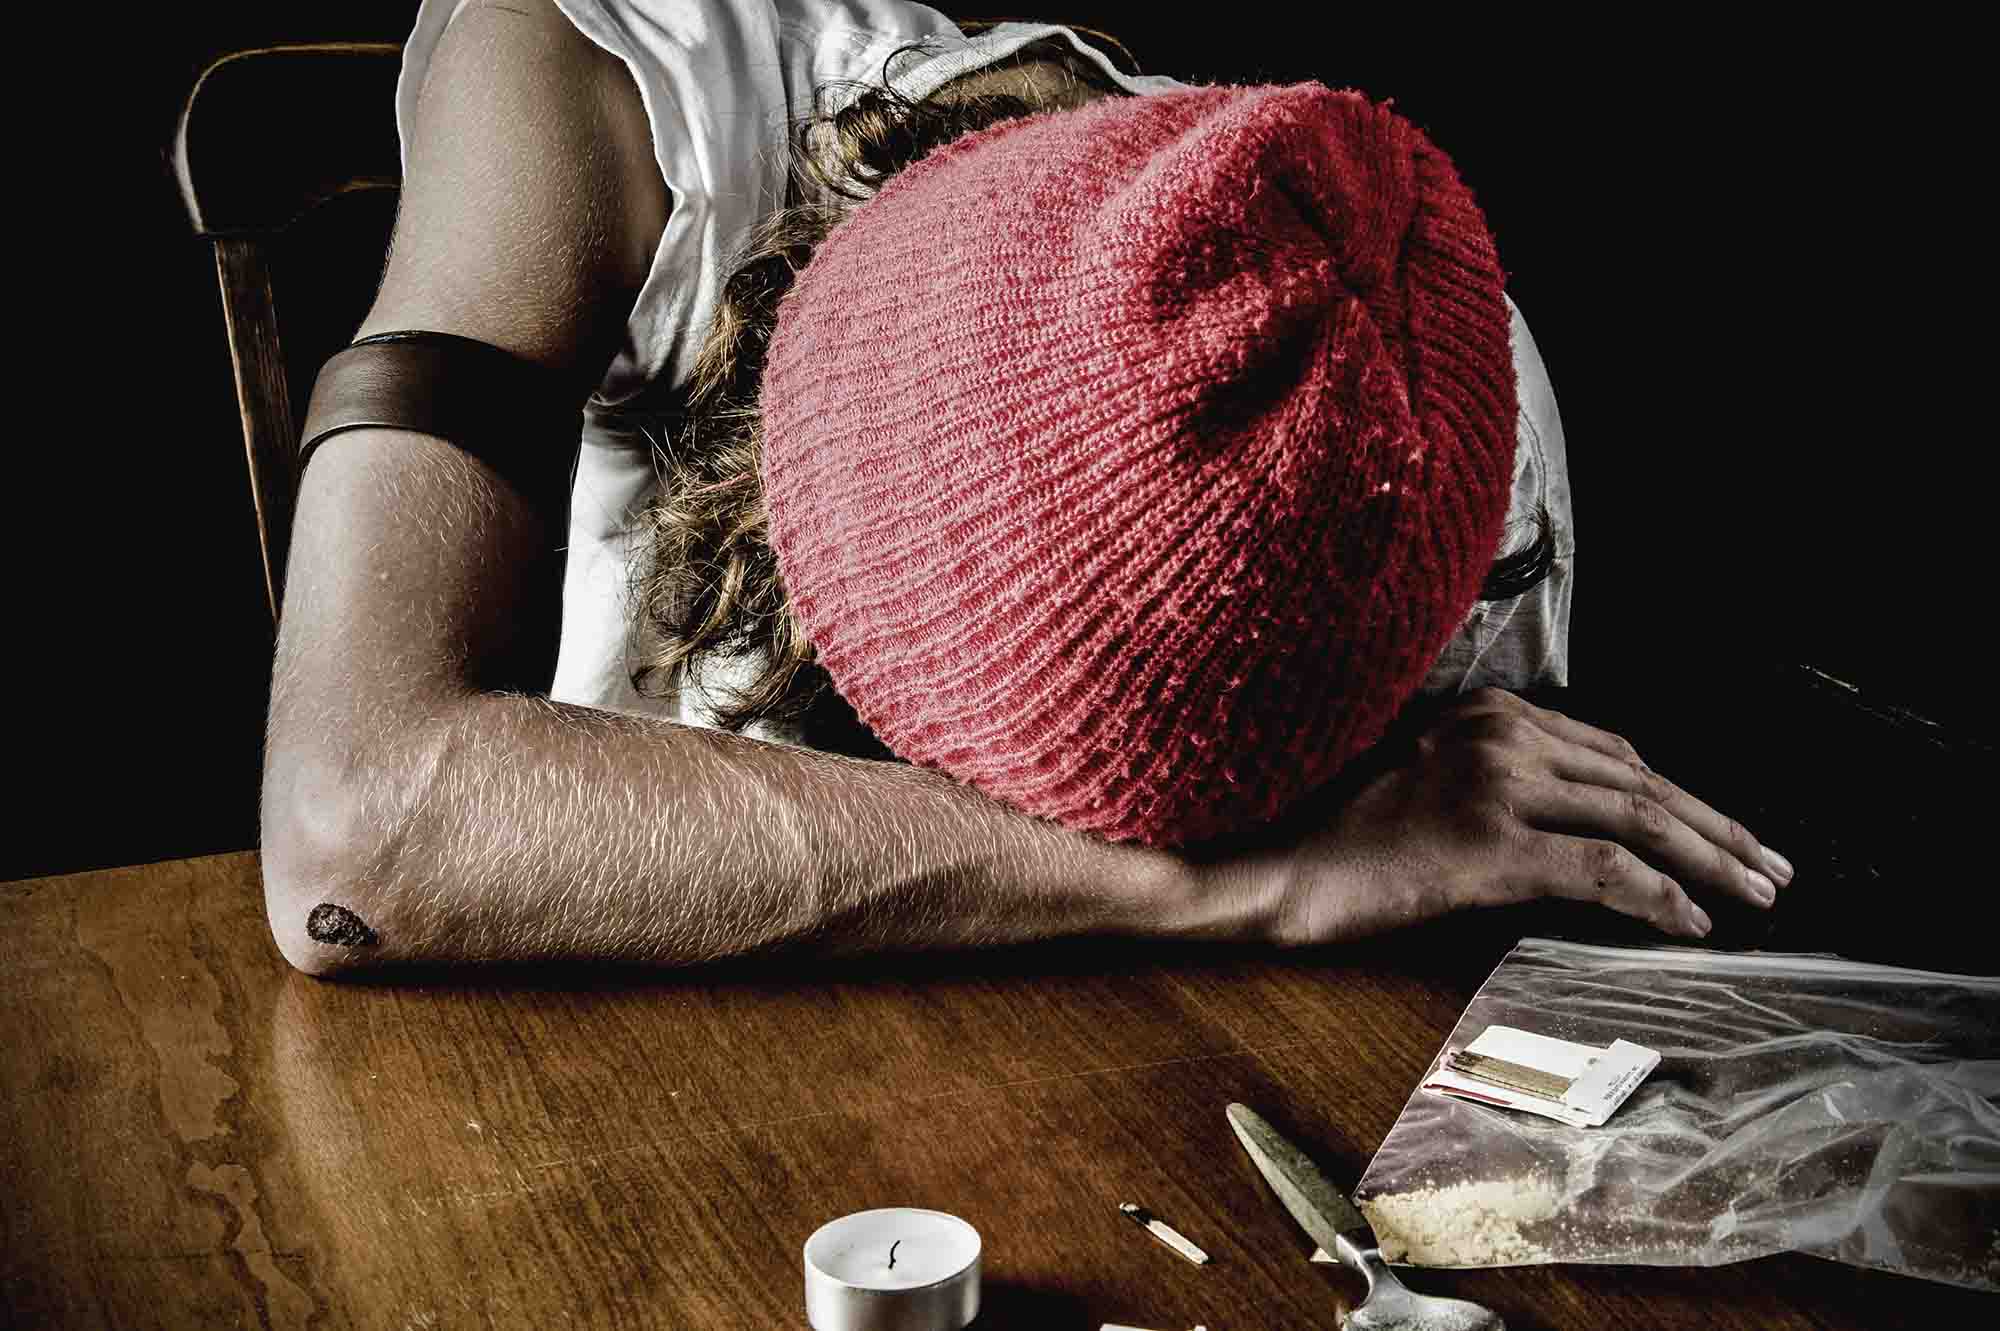 What happens when you overdose on drugs?